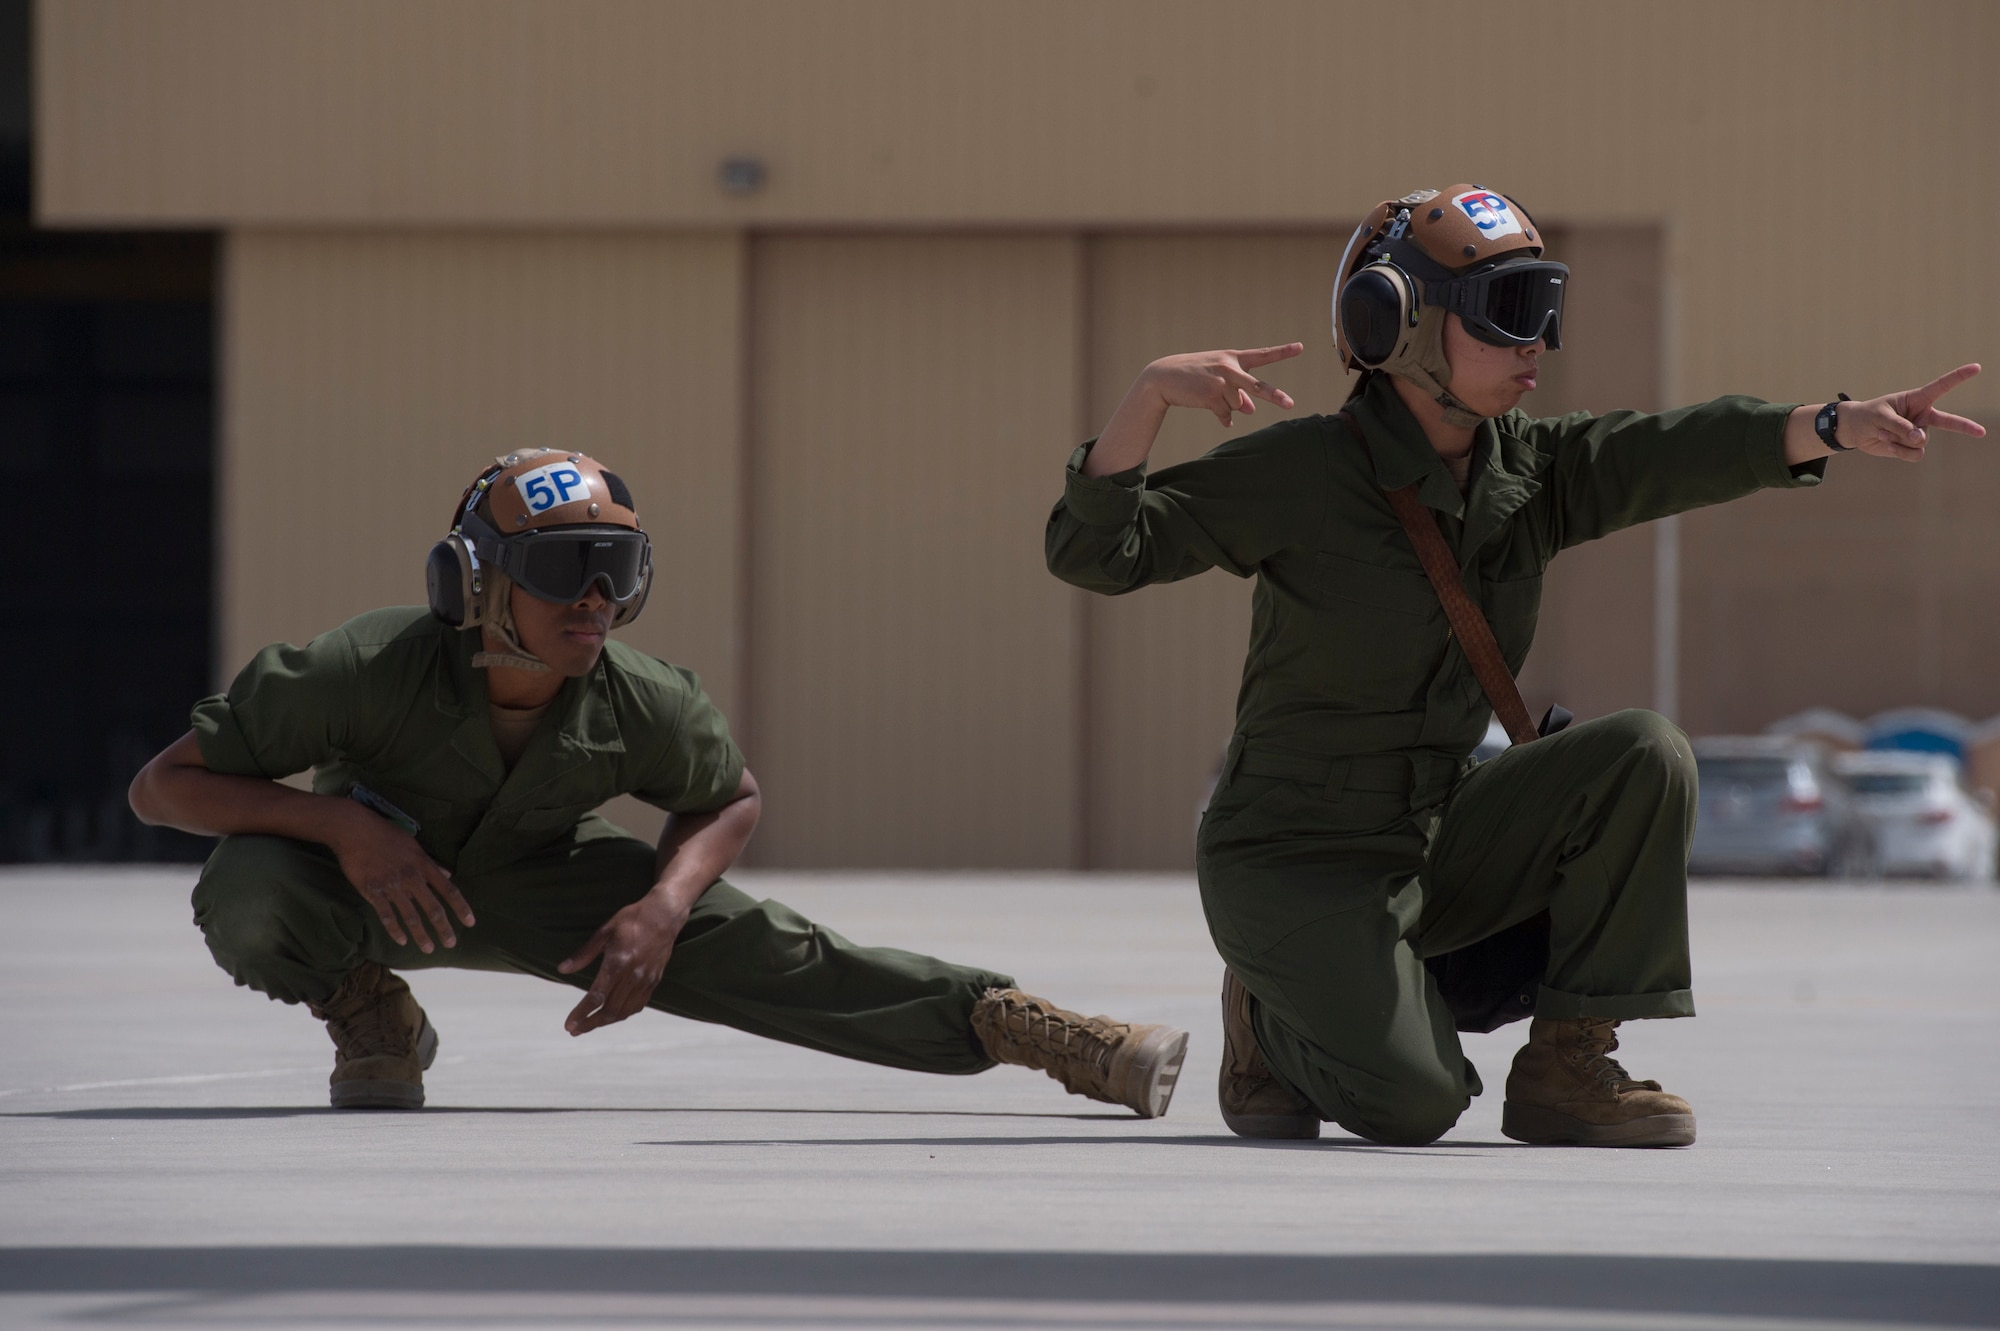 U.S. Navy Airman Shannon Barde, left, Electronic Attack Squadron 135 (VAQ-135) “Black Ravens” plane captain, and U.S. Navy Airman Waisum Cheung, VAQ-135, use hand signals to ensure pre-flight inspections for an EA-18G Growler are conducted safely March 4, 2019, at Al Udeid Air Base, Qatar. VAQ-135 is deployed to the U.S. 5th Fleet area of operations in support of naval operations to ensure maritime stability and security in the Central Region, connecting the Mediterranean and the Pacific through the western Indian Ocean and three strategic choke points. The squadron’s EA-18G Growlers employ an electronic attack capability in support of combat missions across the region. (U.S. Air Force photo by Tech. Sgt. Christopher Hubenthal)